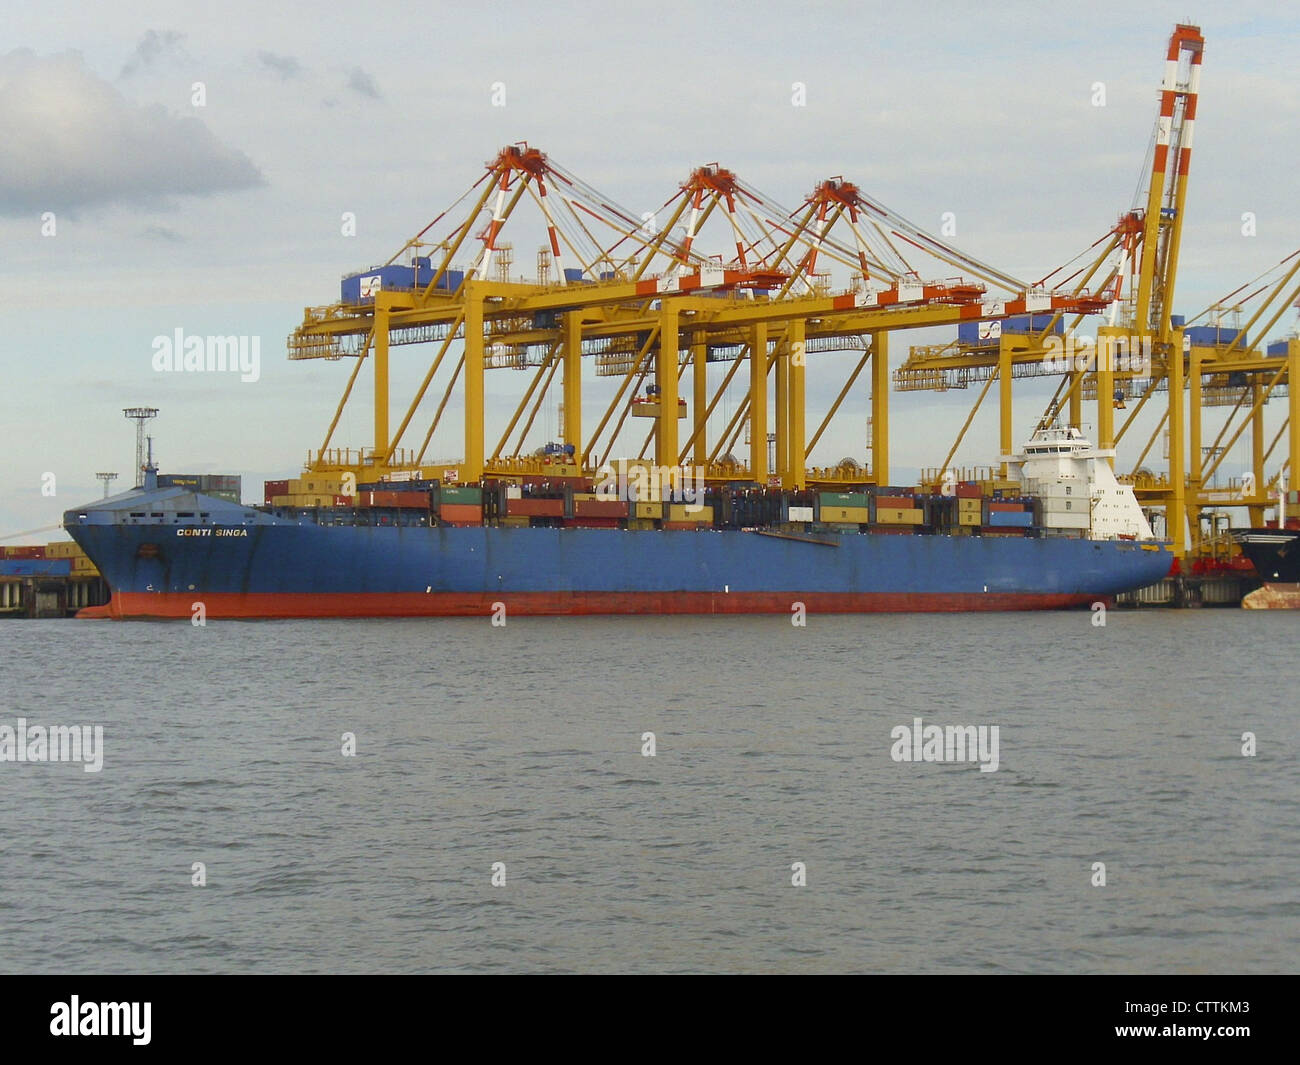 The container ship '''Conti Singa''' at the container terminal Bremerhaven, Germany. Stock Photo